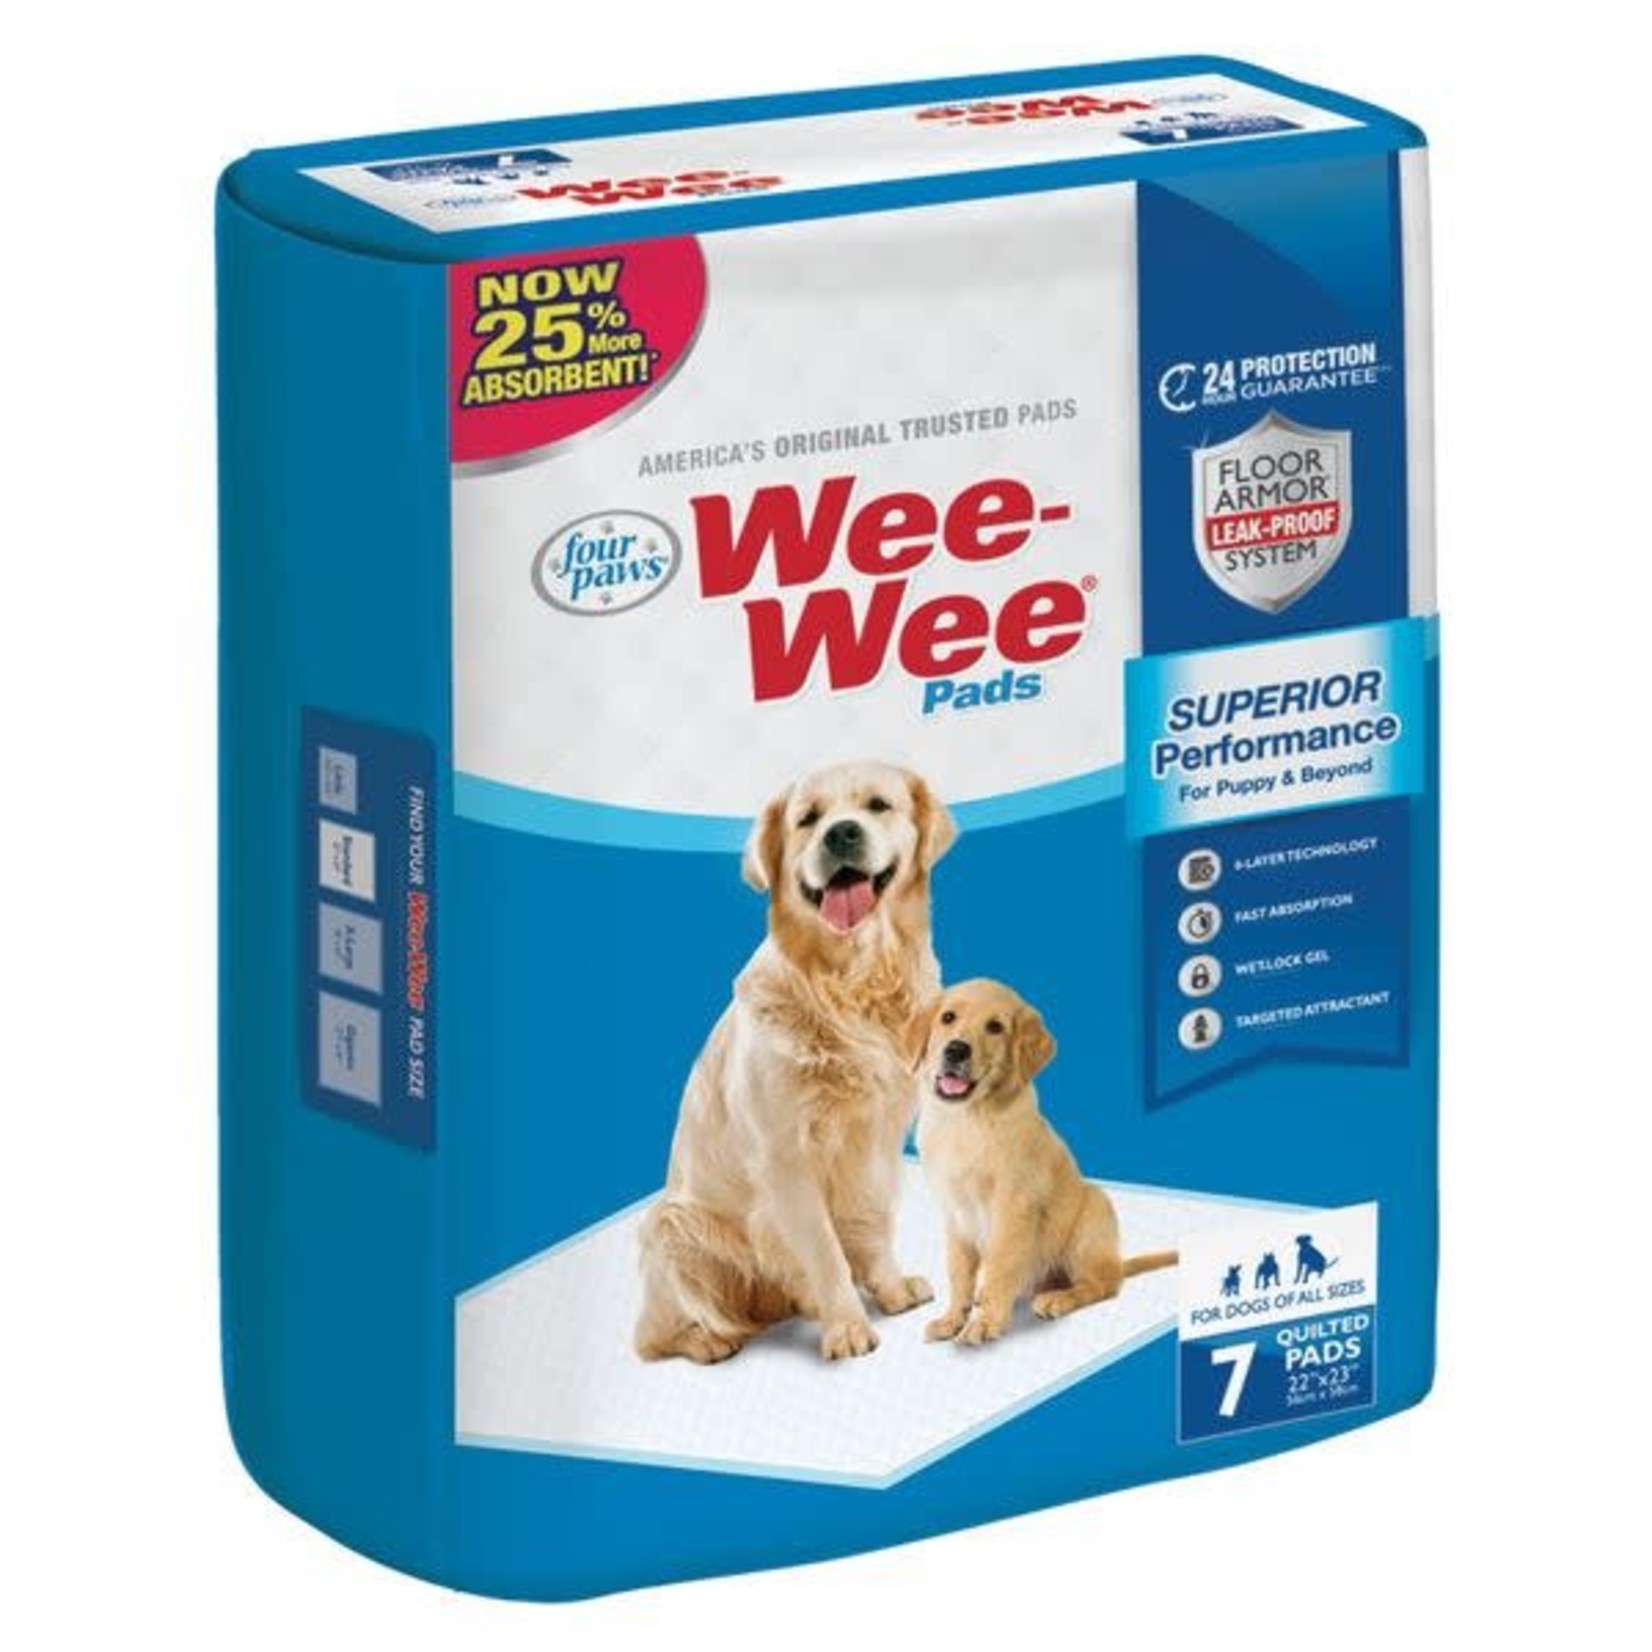 Four Paws Wee Wee Pads 7 pk